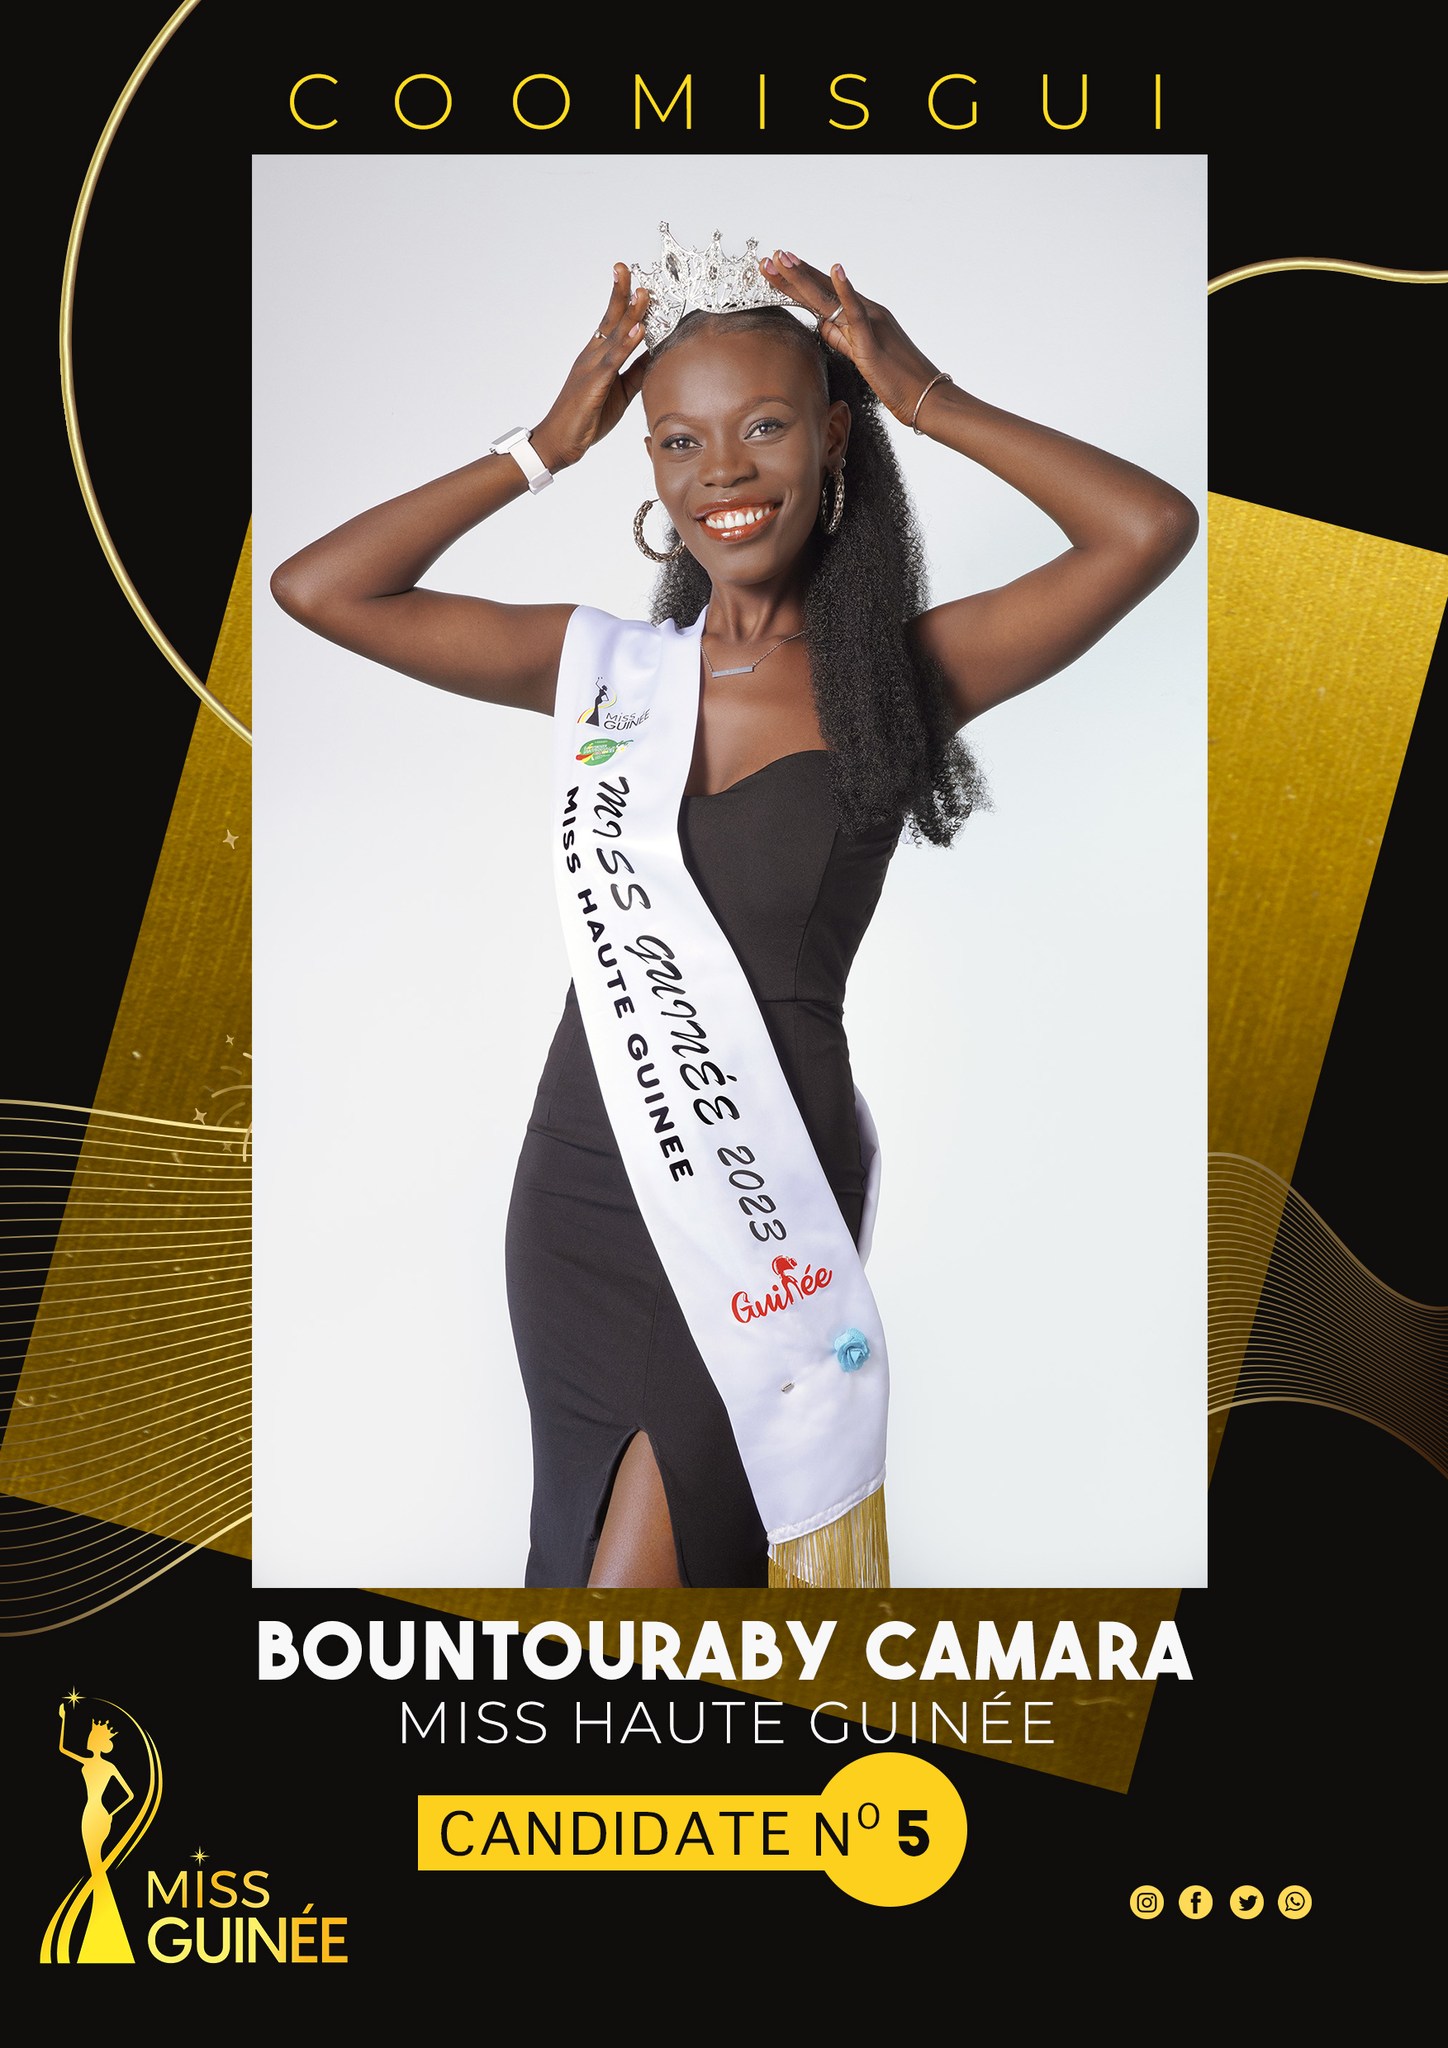 The Comity of COOMISGUI - Mrs AMINATA DIALLO  presents the Finalist of MISS GUINEE 2023 - Miss BOUTOURABY CAMARA - Representing Miss Haute GUINEE - CANDIDATE number 5  - DN-AFRICA MEDIA PARTNER